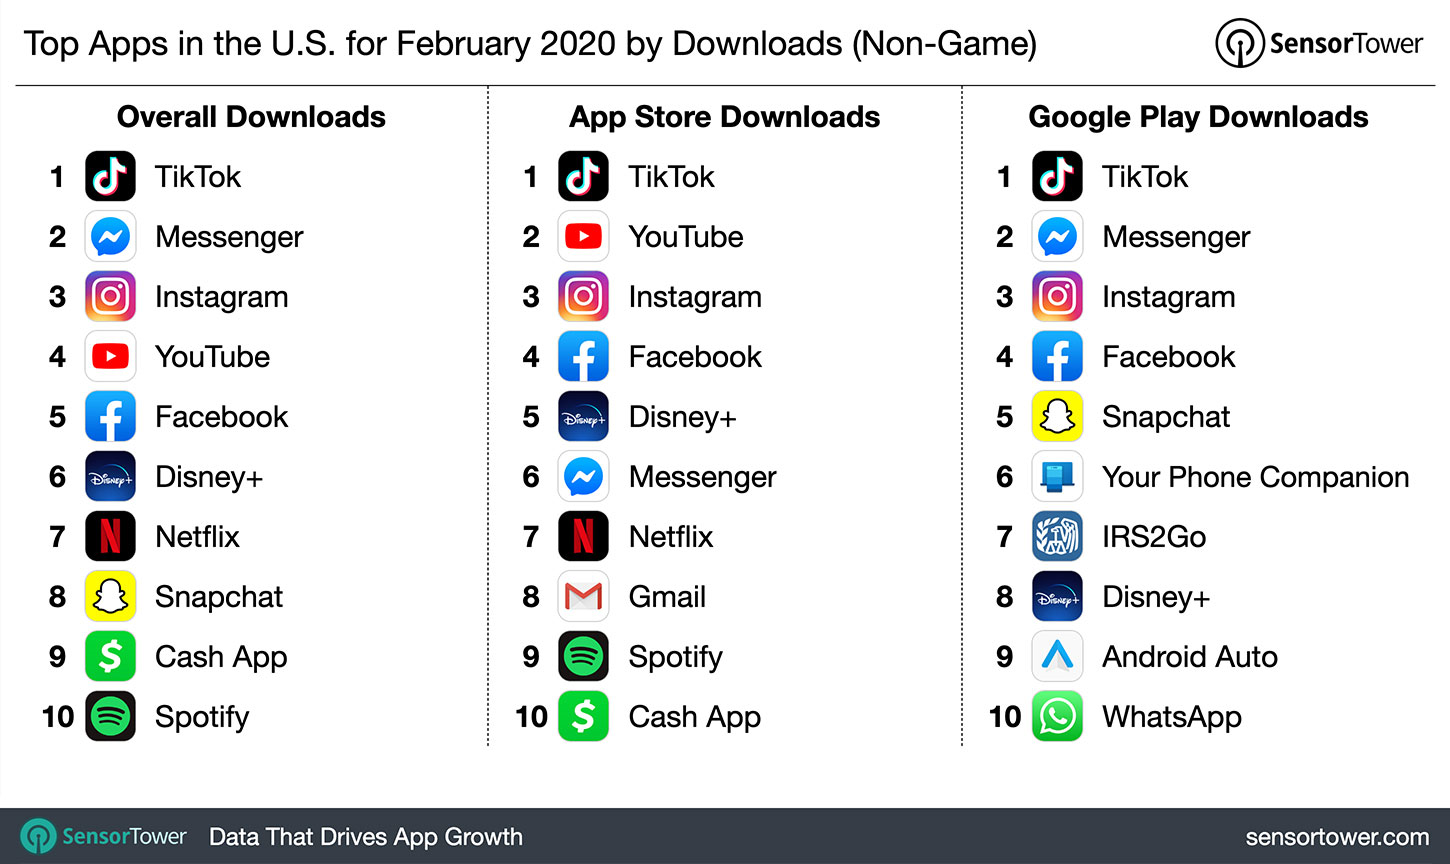 Top Apps in the U.S. for February 2020 by Downloads